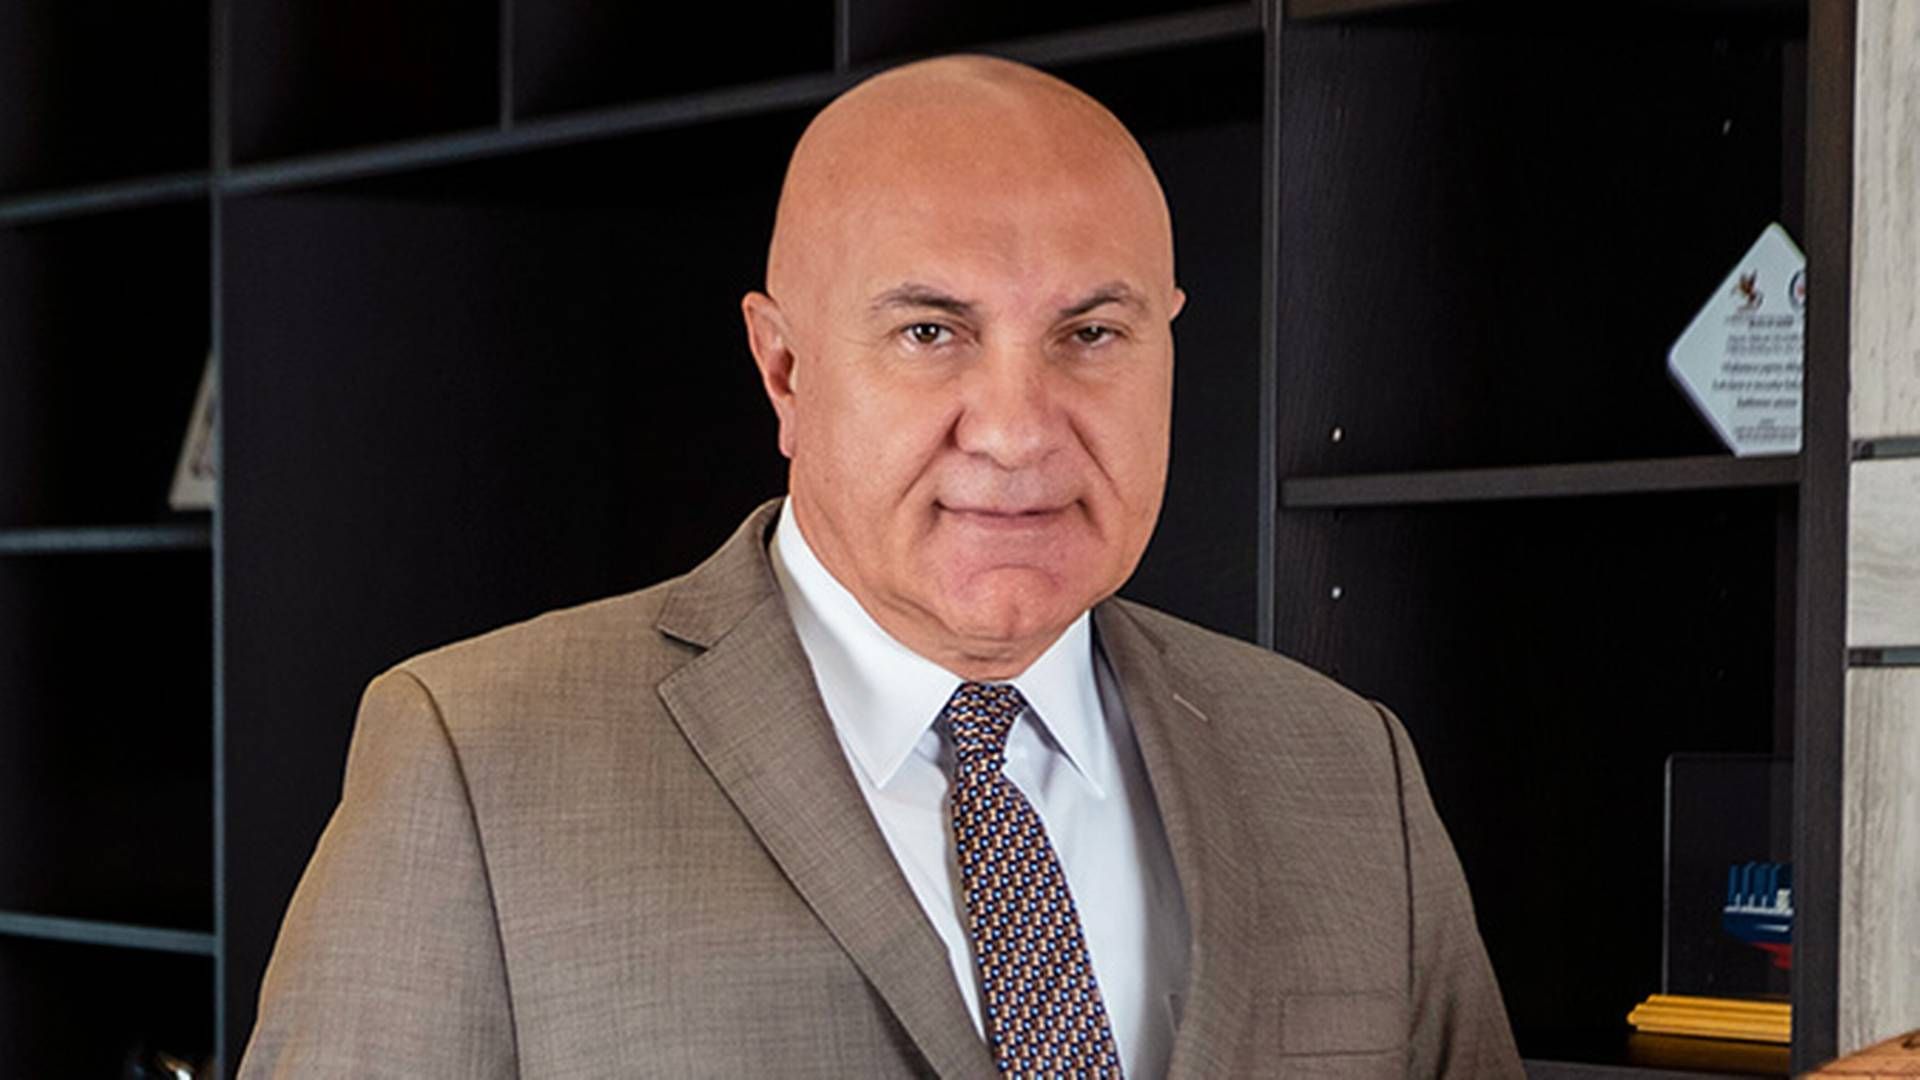 ”I went to CMA as an industrial investor, and although all the risks were there, I knew how to control a worst-case scenario,” says Robert Yildirim about his entry as a major shareholder and rescuer in CMA CGM. | Photo: Yildirim Group